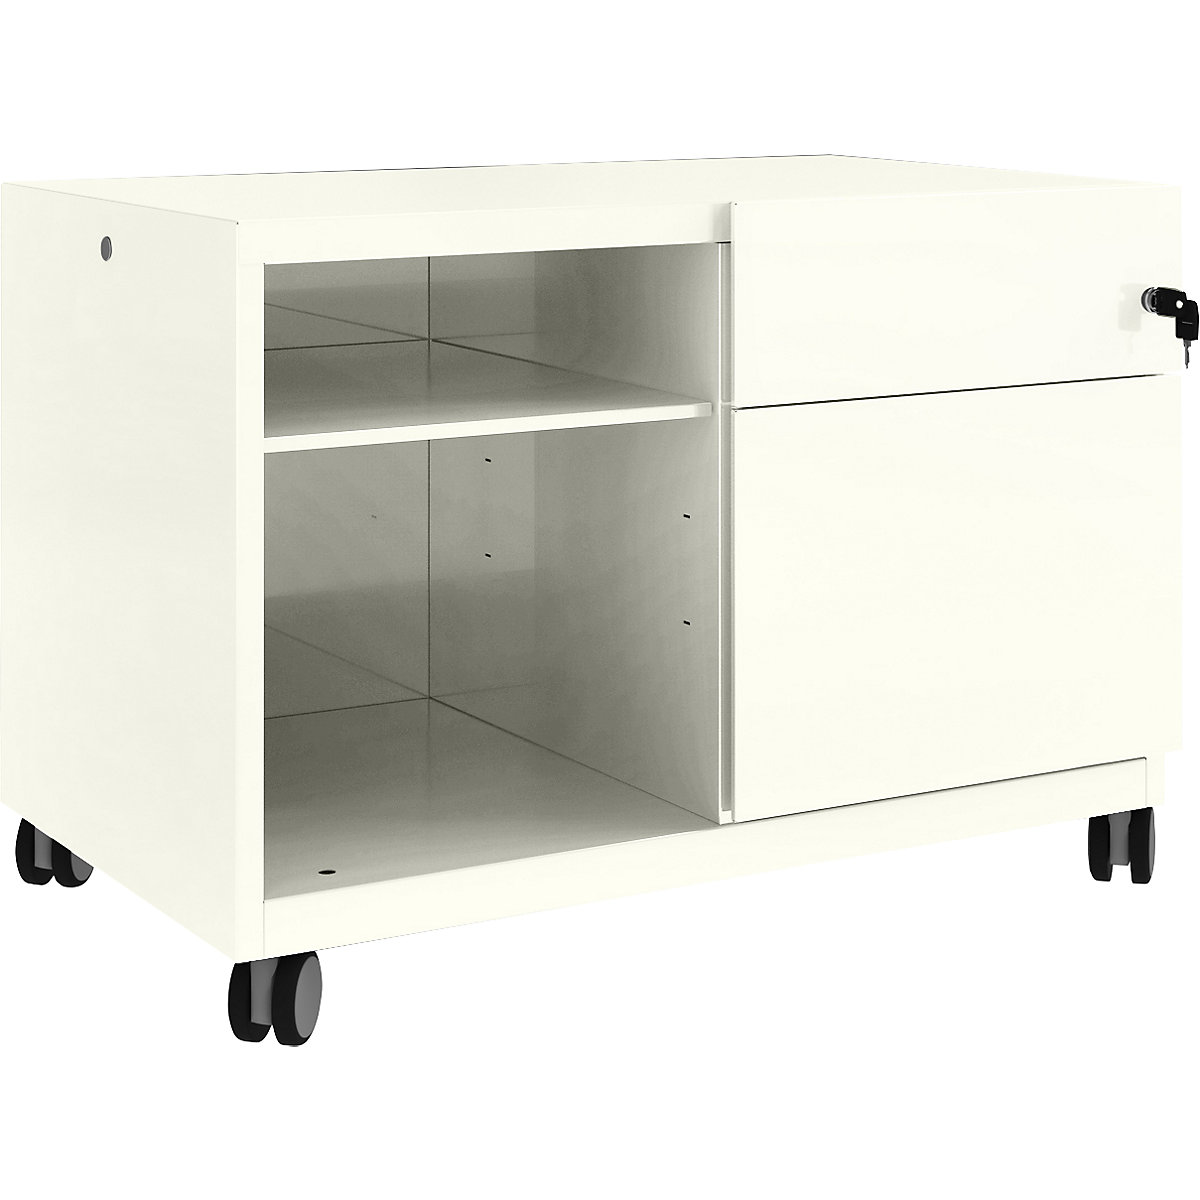 Note™ CADDY, HxBxT 563 x 800 x 490 mm – BISLEY, 1 universal drawer and suspension file drawer on the right, pure white-9